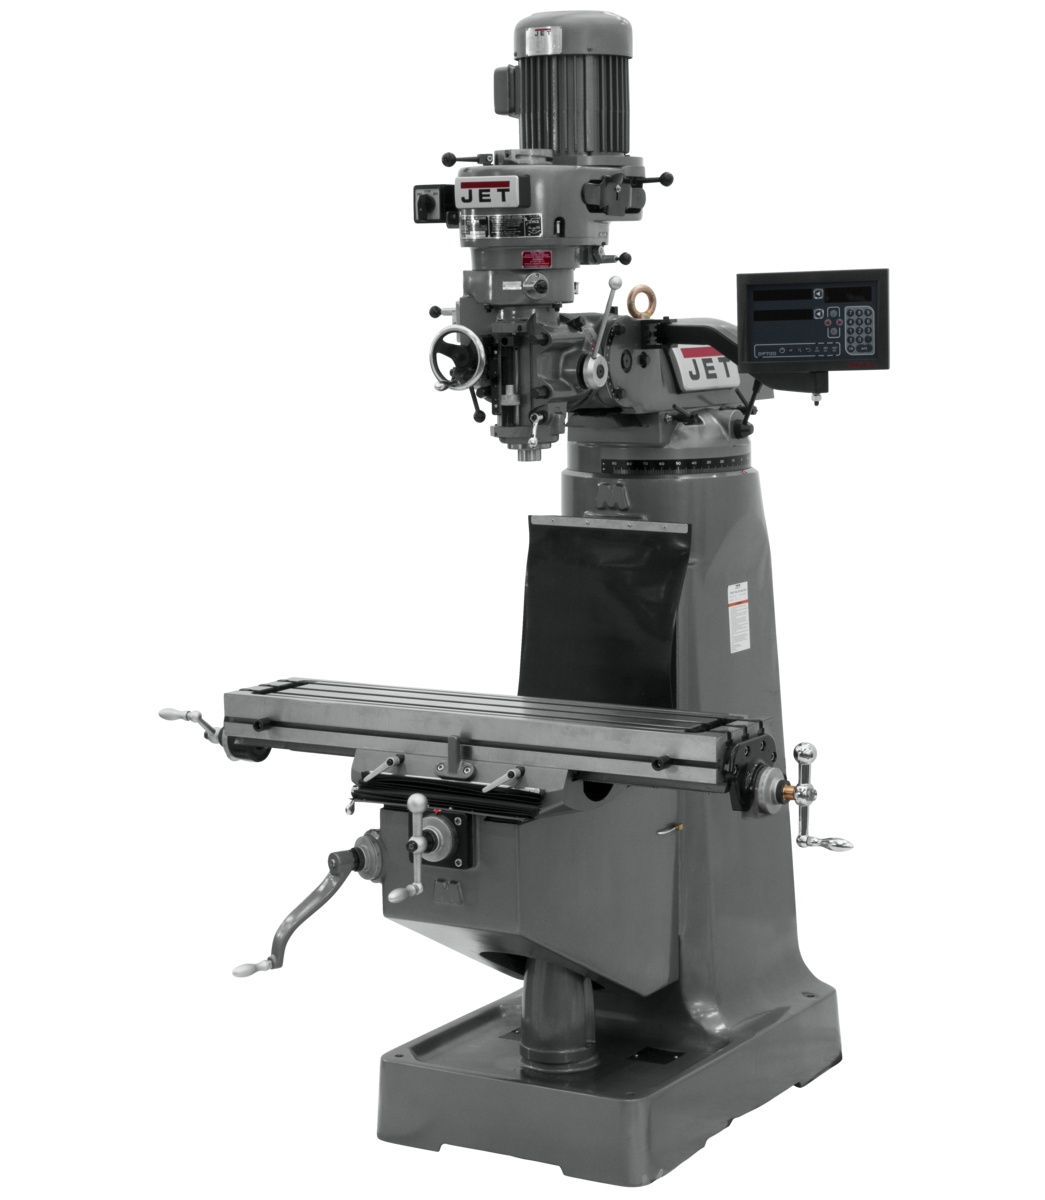 JTM-1 Mill With 3-Axis Newall DP700 DRO (Quill)